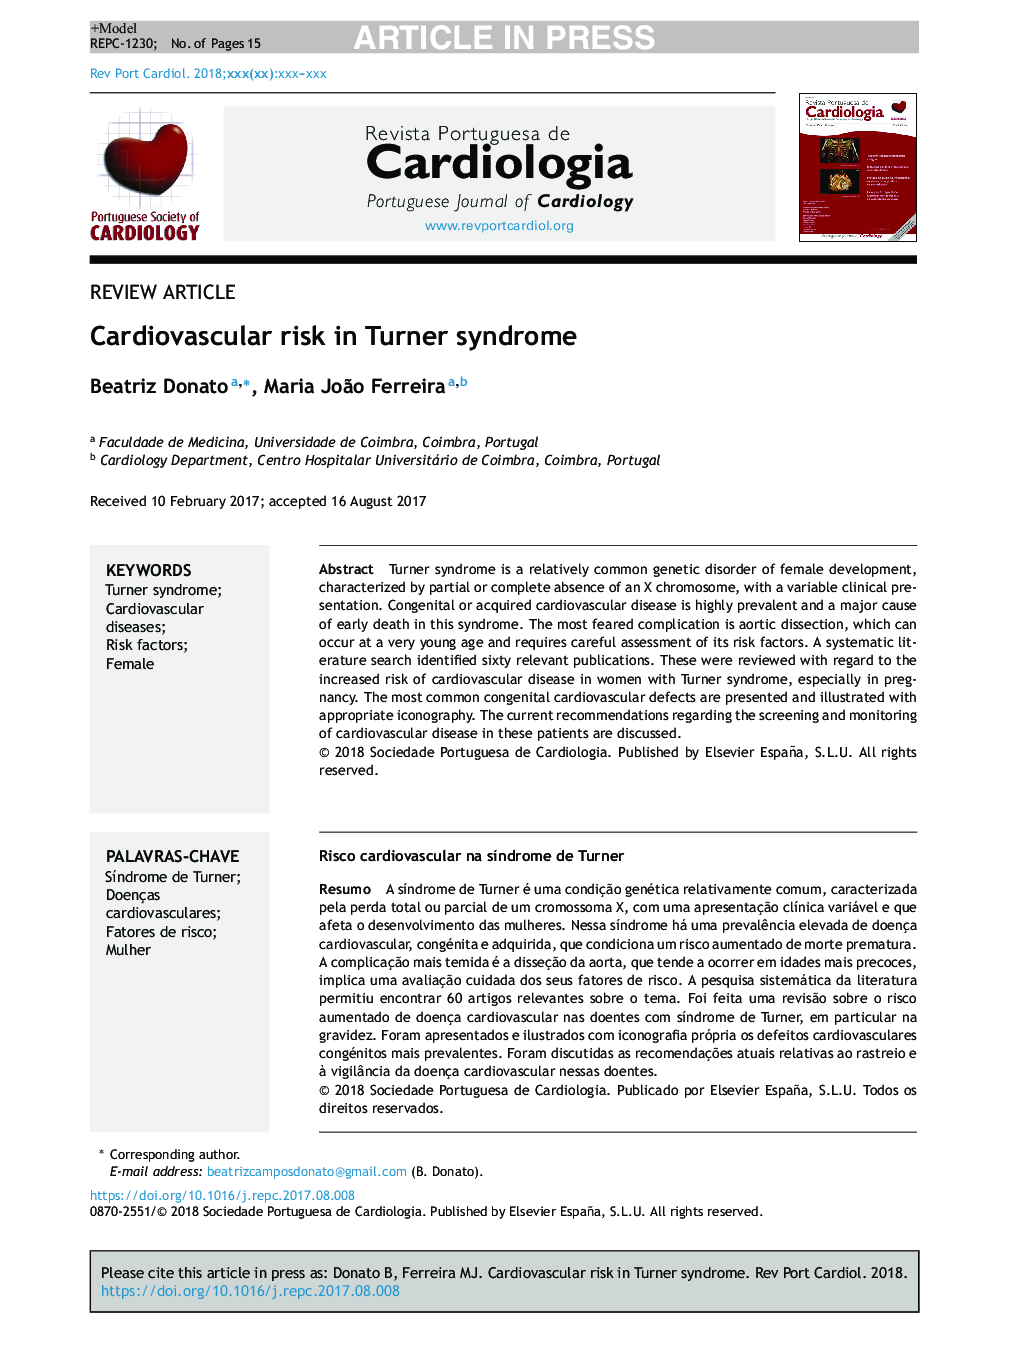 Cardiovascular risk in Turner syndrome